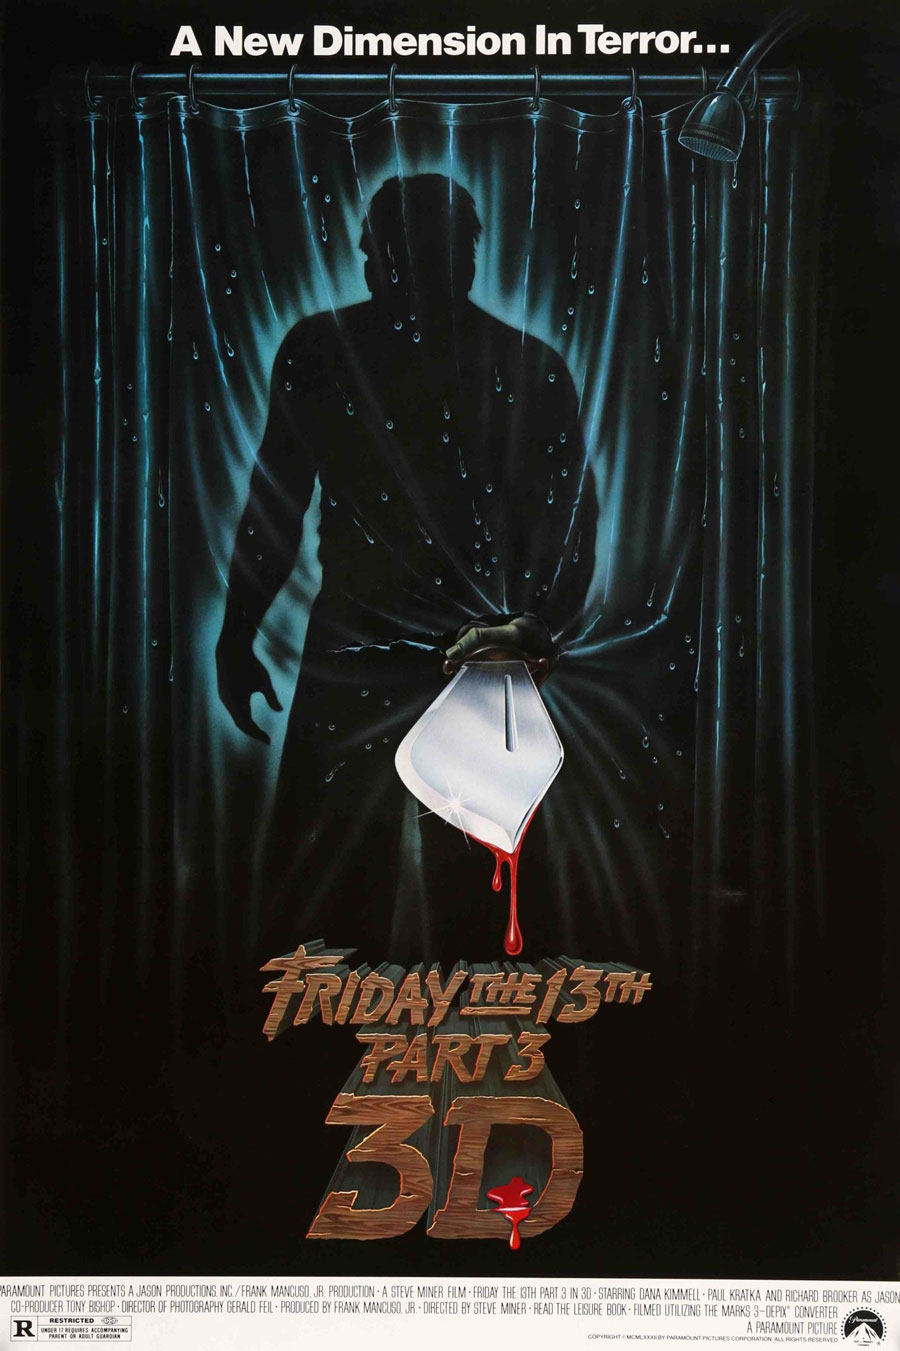 Friday the 13th, Part III